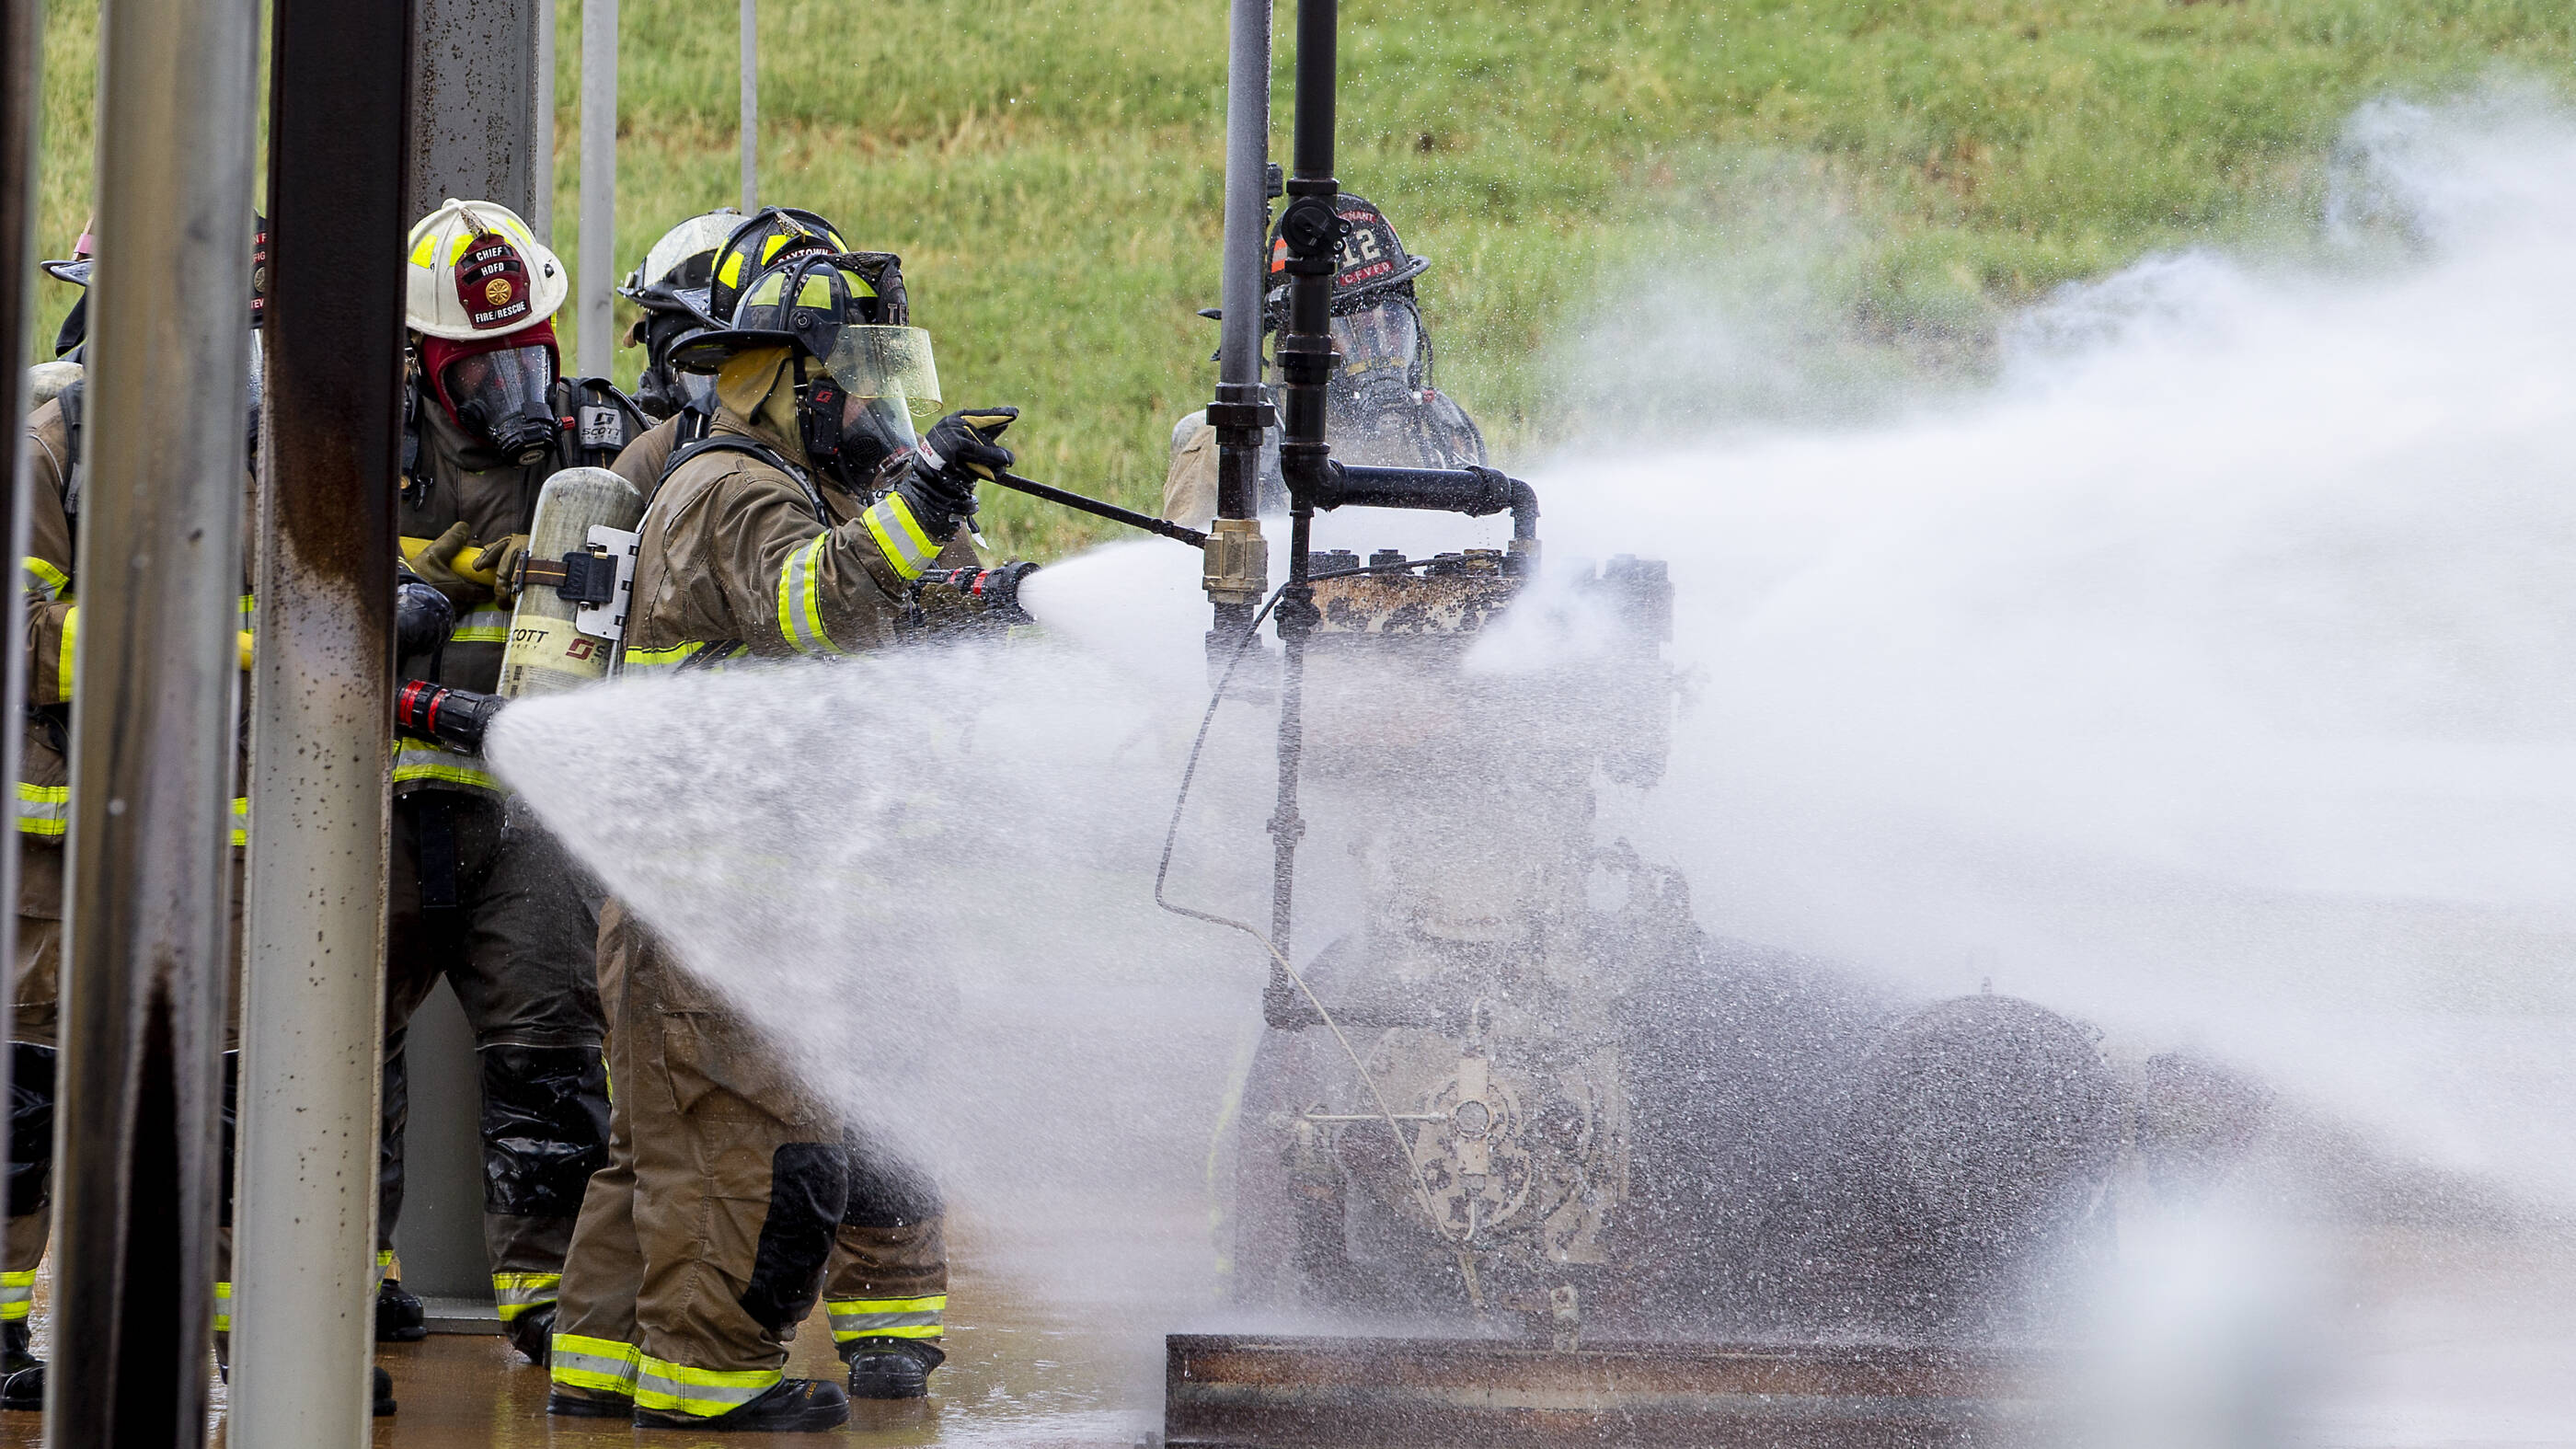 ExxonMobil employees regularly attend specialized trainings, often with local firefighters and other first responders, to help ensure preparedness in the case of an emergency.